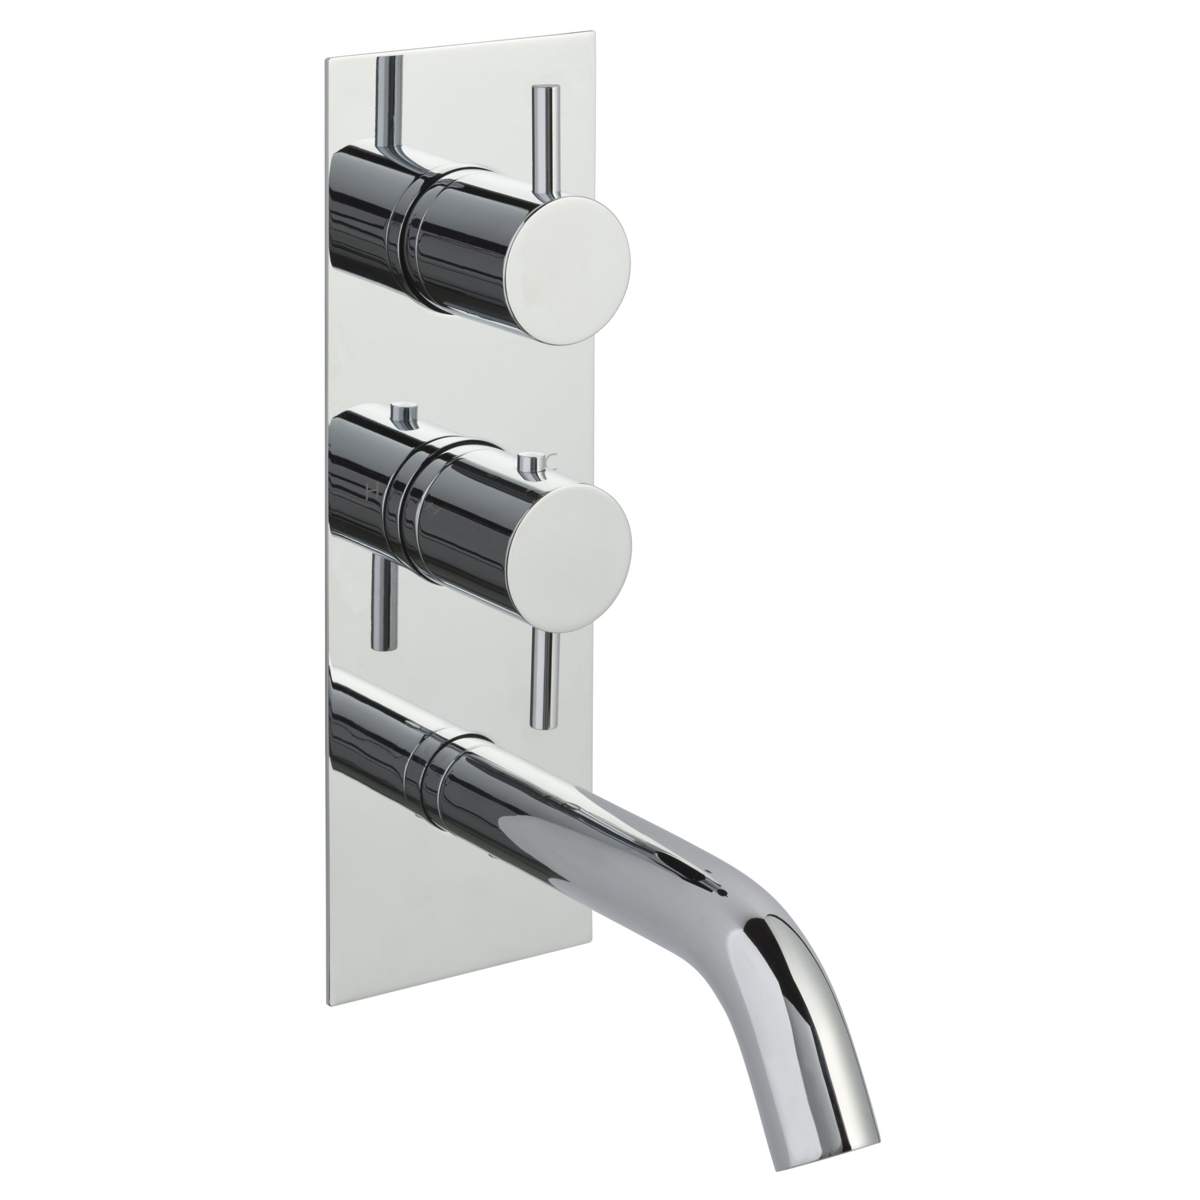 JTP Florence Thermostatic Concealed 2 Outlet Shower Valve with Spout (5865)